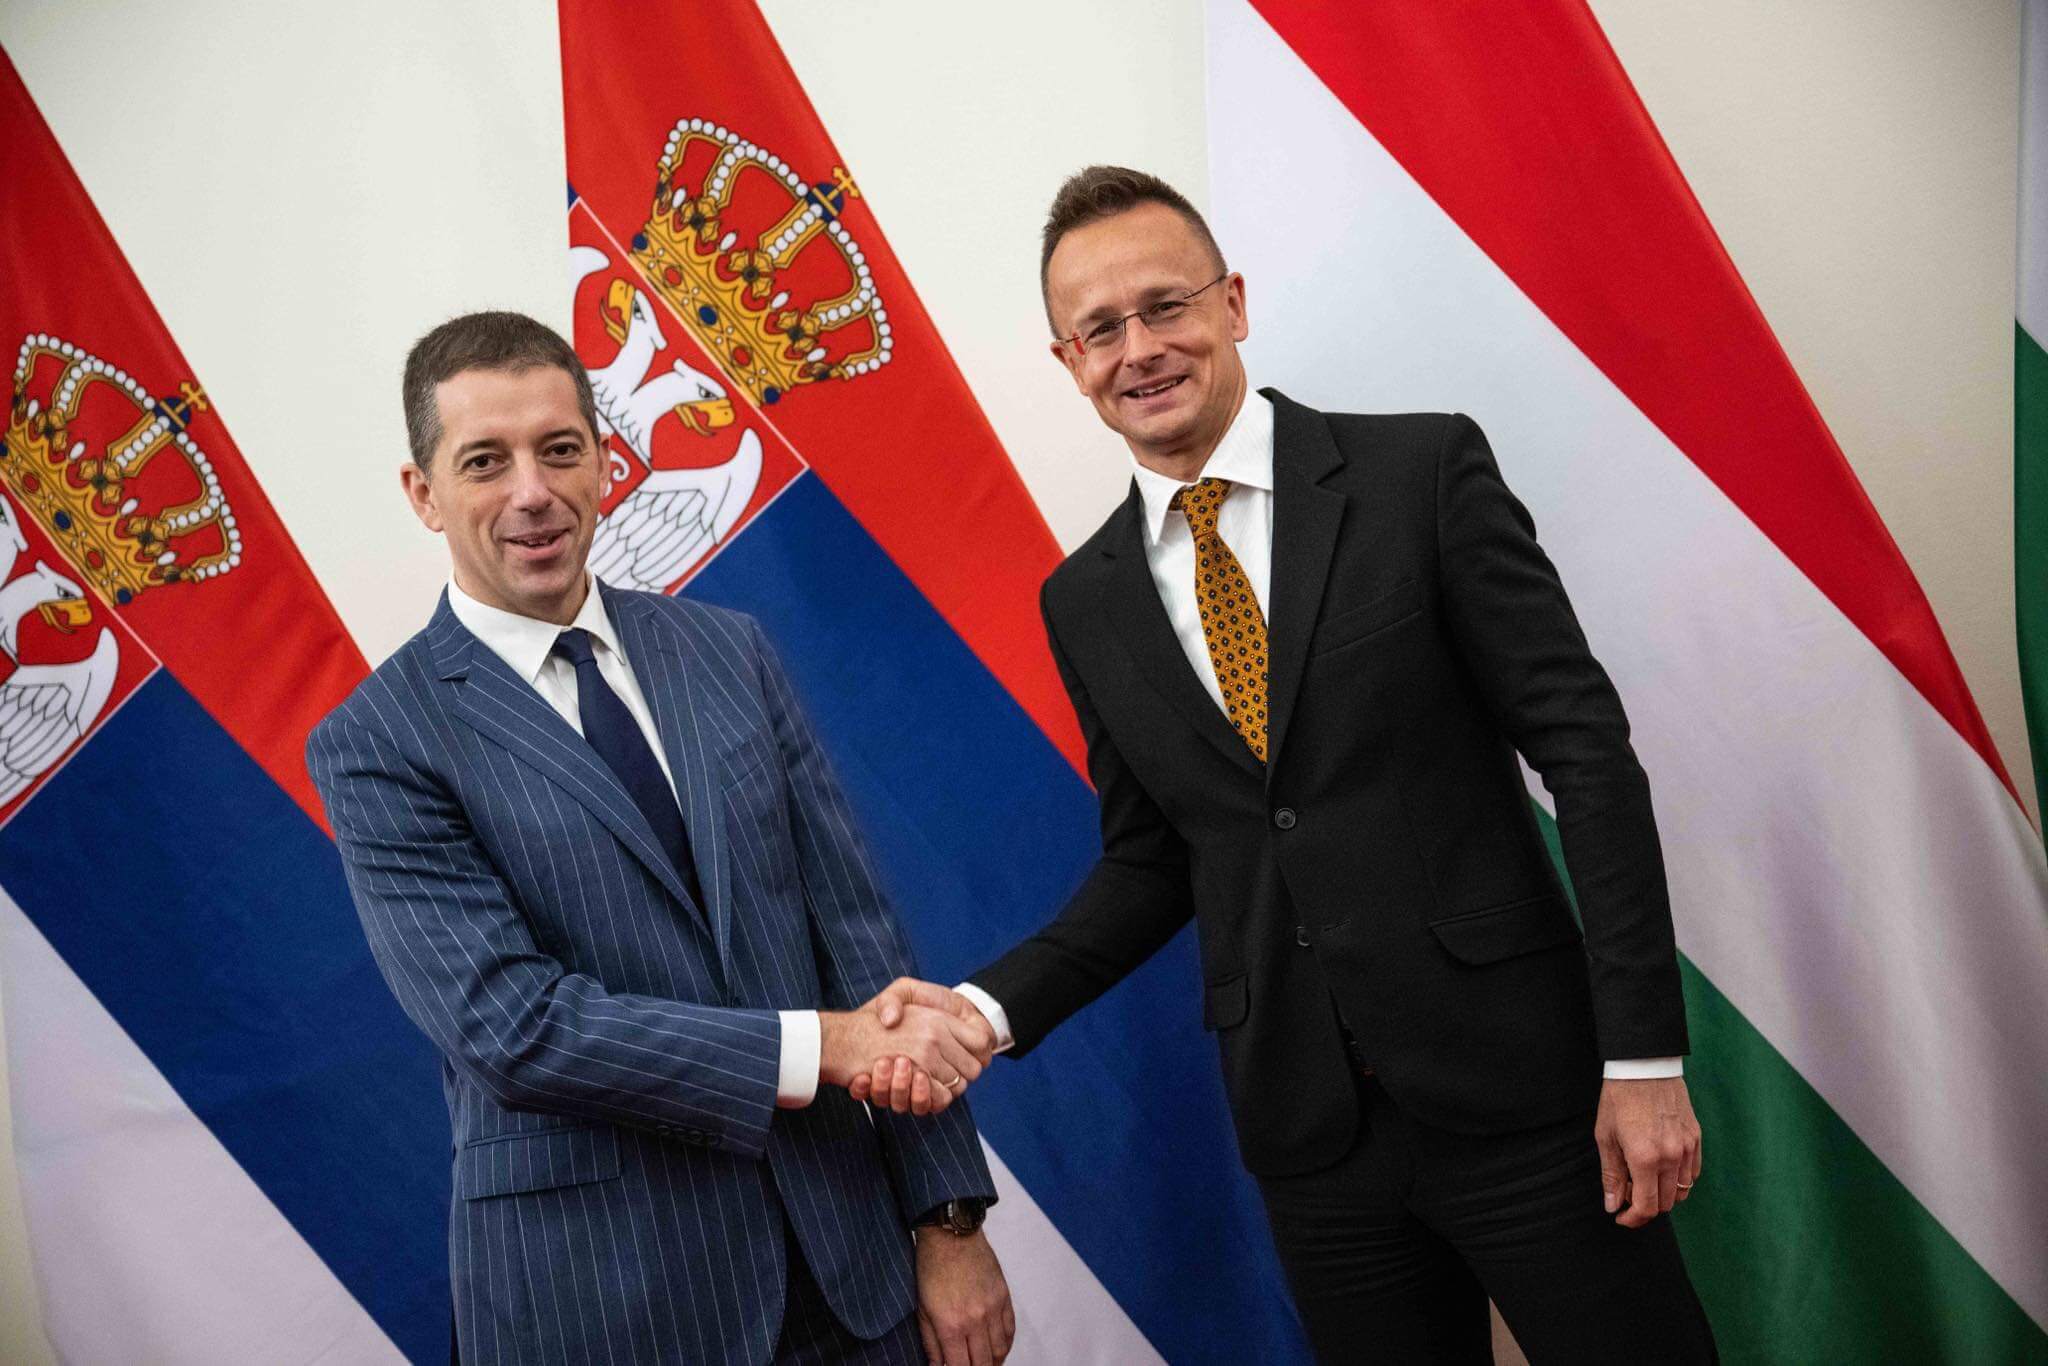 Why is Alliance with Serbia 'Invaluable' to Hungary?